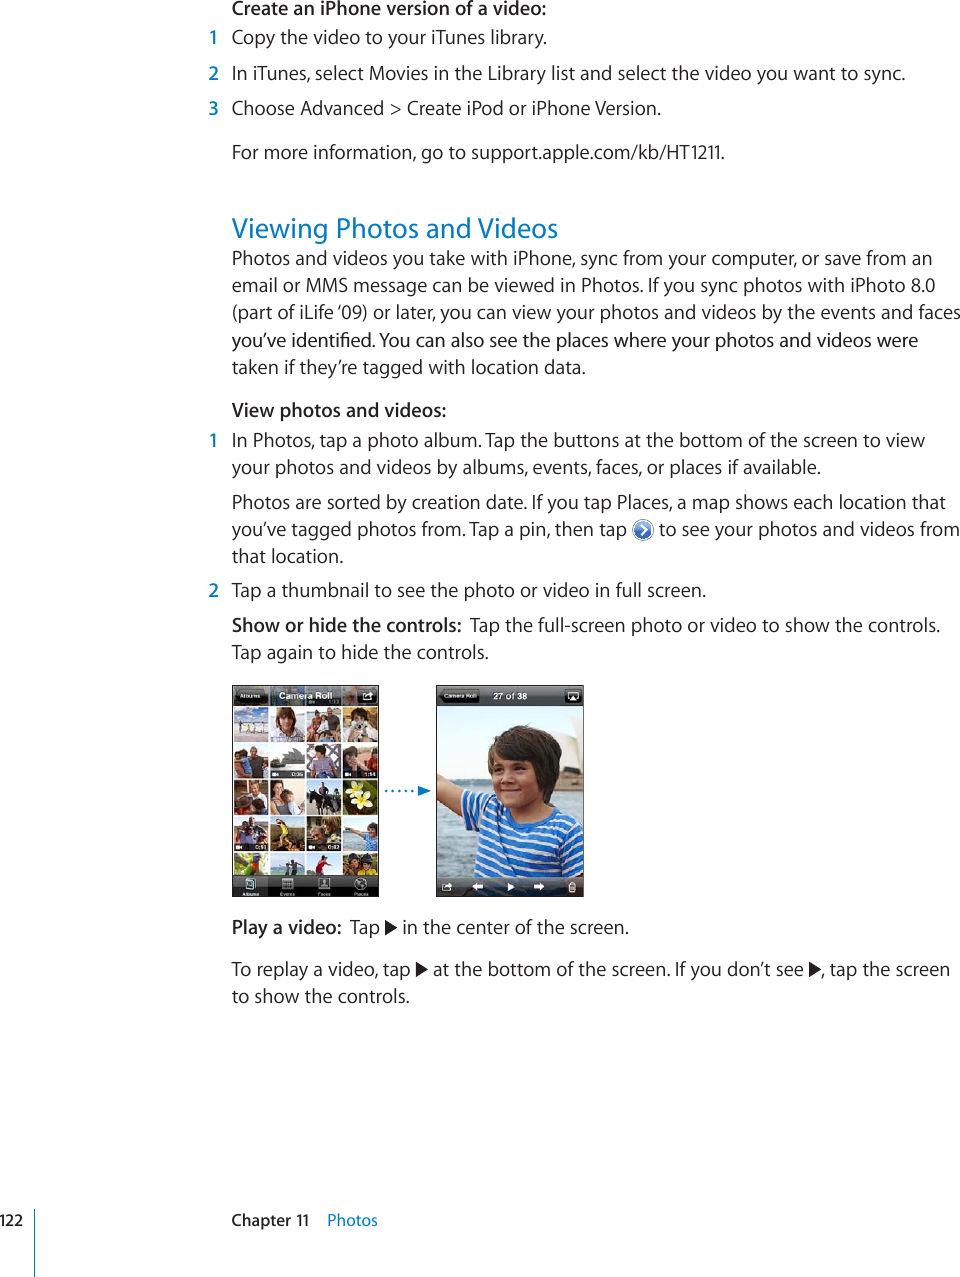 Create an iPhone version of a video:1Copy the video to your iTunes library.2In iTunes, select Movies in the Library list and select the video you want to sync.3Choose Advanced &gt; Create iPod or iPhone Version.For more information, go to support.apple.com/kb/HT1211.Viewing Photos and VideosPhotos and videos you take with iPhone, sync from your computer, or save from an email or MMS message can be viewed in Photos. If you sync photos with iPhoto 8.0 (part of iLife ‘09) or later, you can view your photos and videos by the events and faces [QW¨XGKFGPVK°GF;QWECPCNUQUGGVJGRNCEGUYJGTG[QWTRJQVQUCPFXKFGQUYGTGtaken if they’re tagged with location data.View photos and videos:1In Photos, tap a photo album. Tap the buttons at the bottom of the screen to view your photos and videos by albums, events, faces, or places if available.Photos are sorted by creation date. If you tap Places, a map shows each location that you’ve tagged photos from. Tap a pin, then tap   to see your photos and videos from that location.2Tap a thumbnail to see the photo or video in full screen.Show or hide the controls: Tap the full-screen photo or video to show the controls. Tap again to hide the controls.Play a video: Tap   in the center of the screen.To replay a video, tap   at the bottom of the screen. If you don’t see  , tap the screen to show the controls.122 Chapter 11 Photos